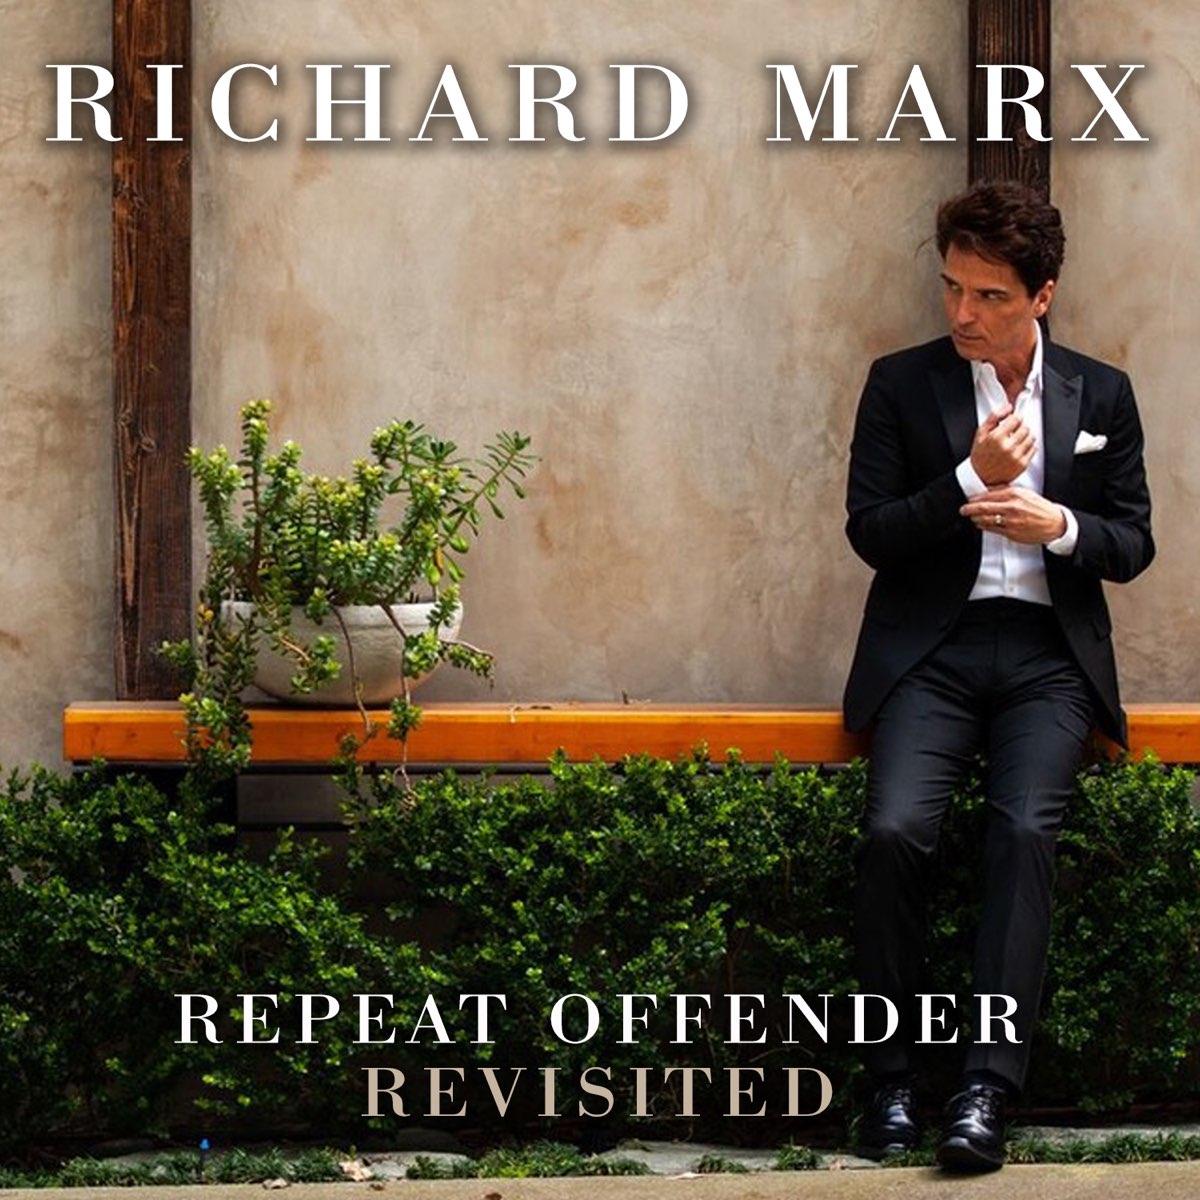 Repeat Offender Revisited by Richard Marx on Apple Music